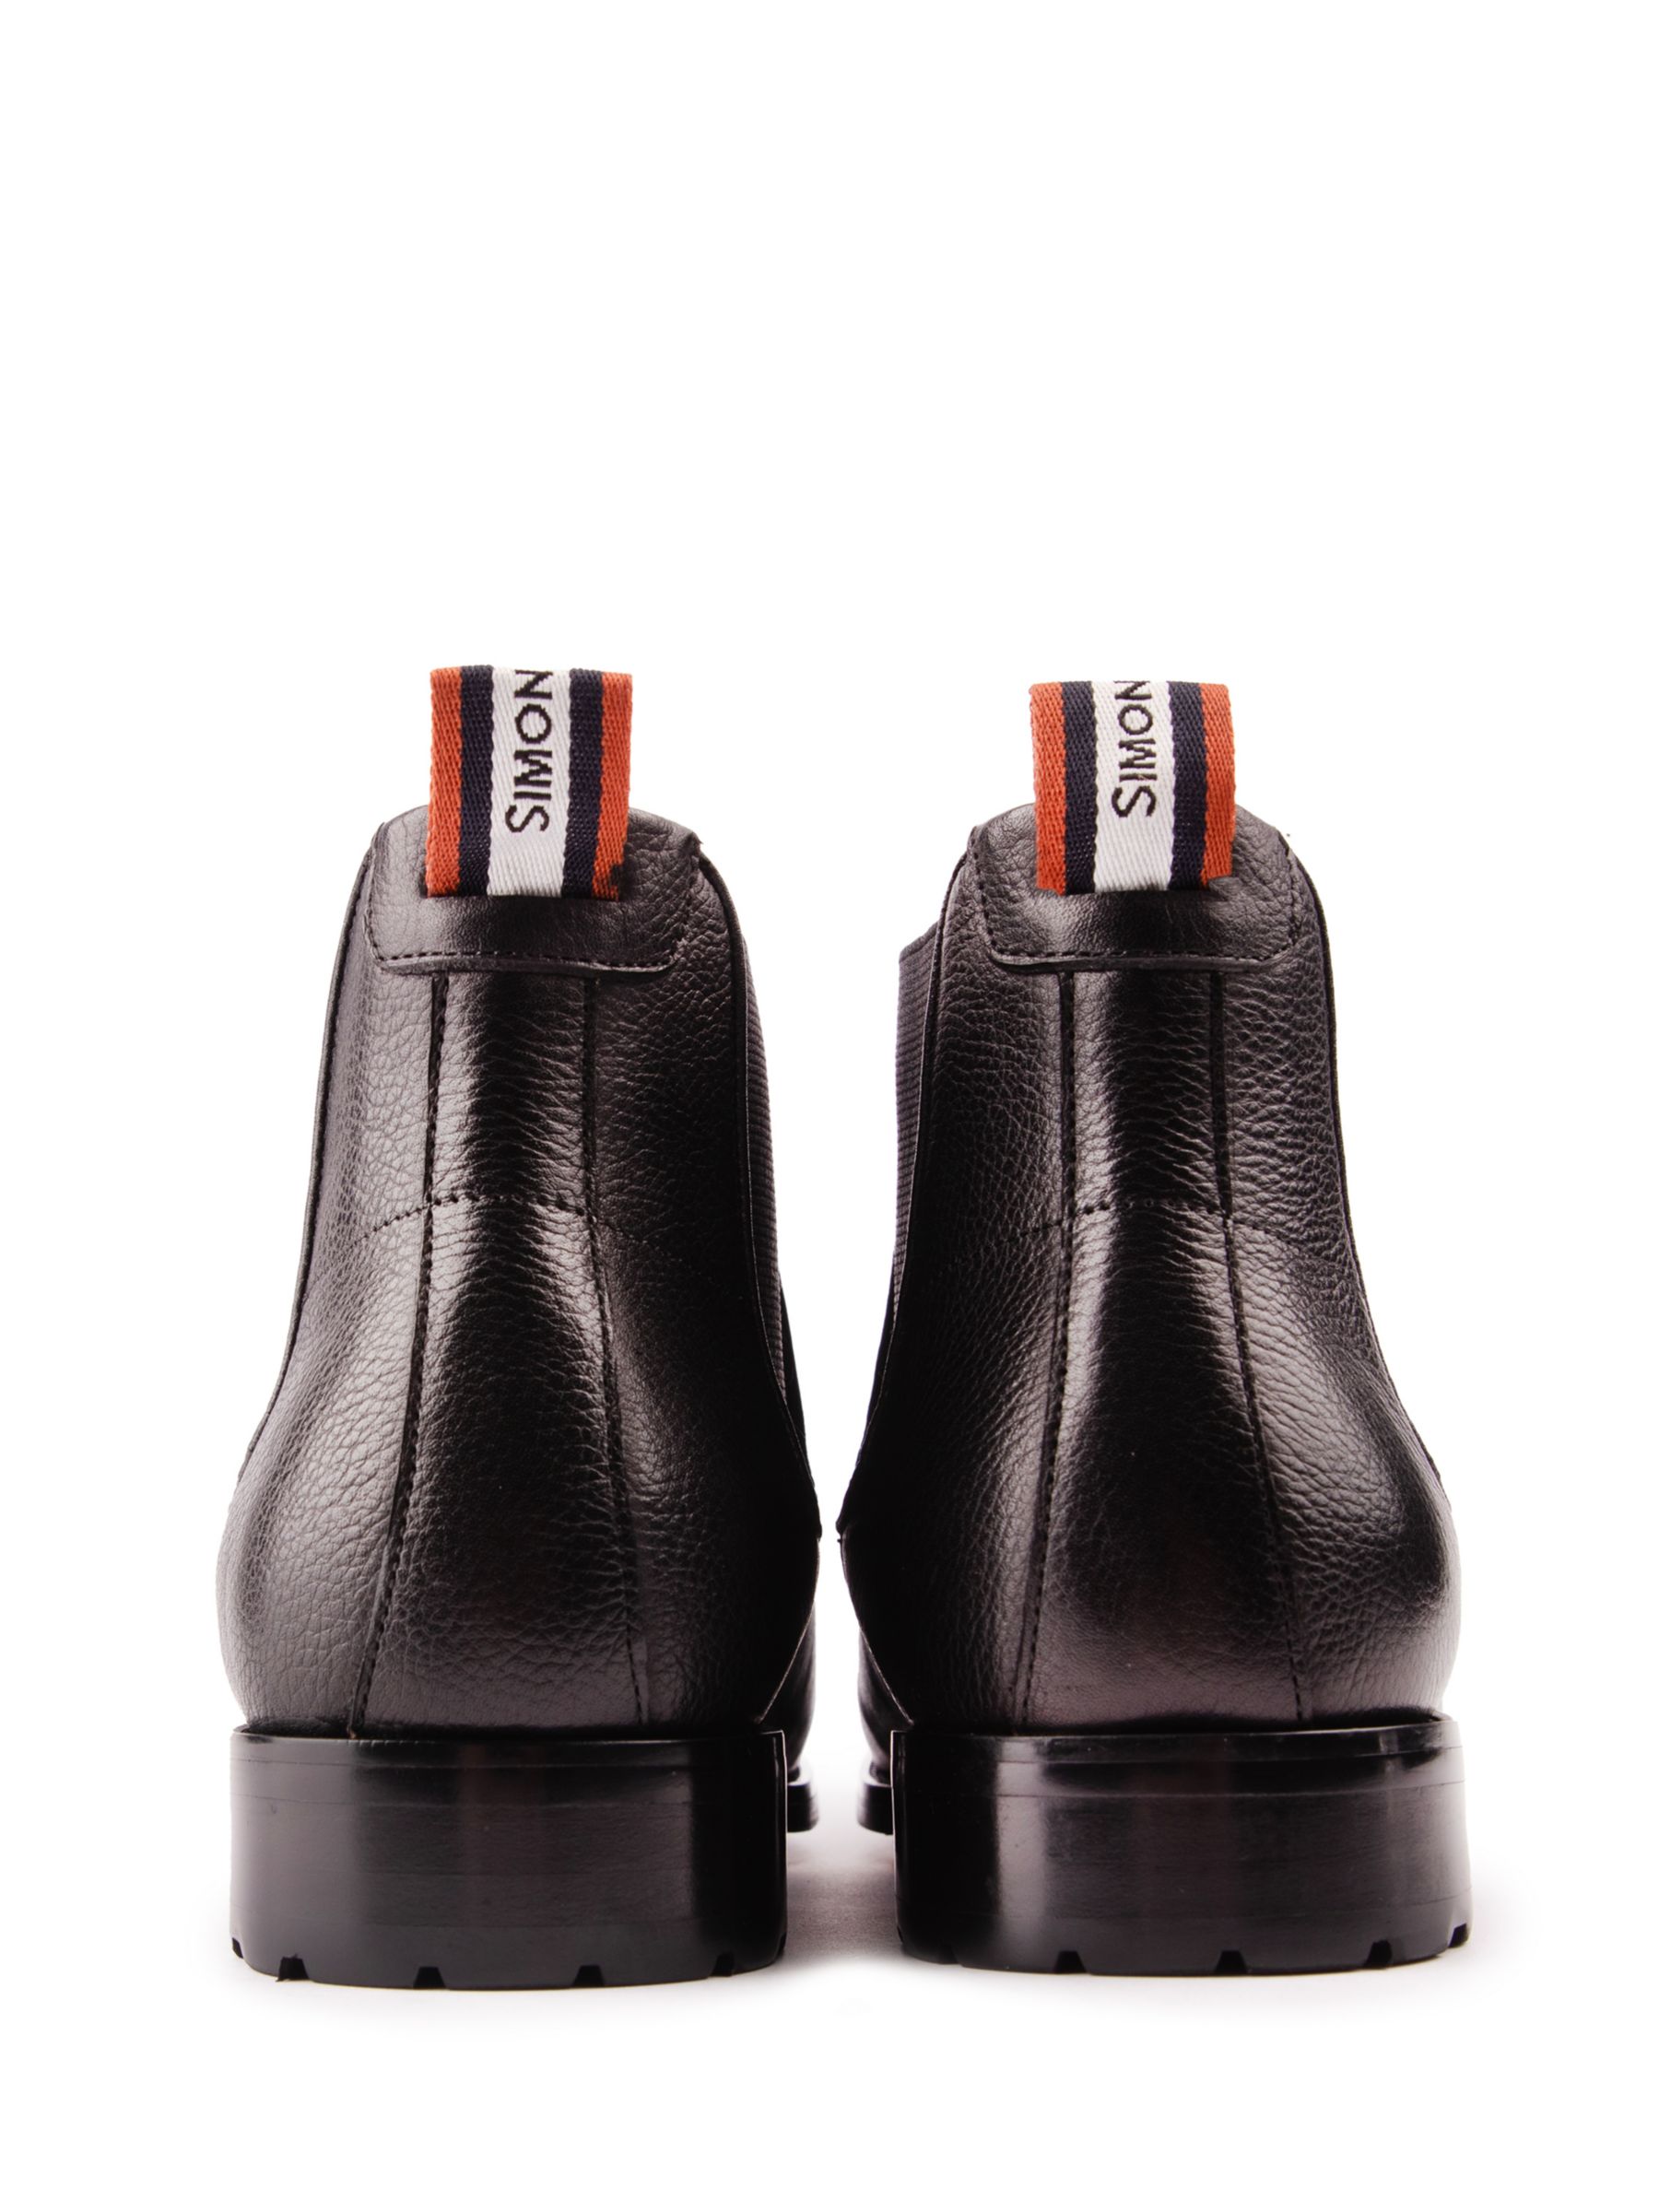 Buy Simon Carter Clover Leather Chelsea Boots Online at johnlewis.com